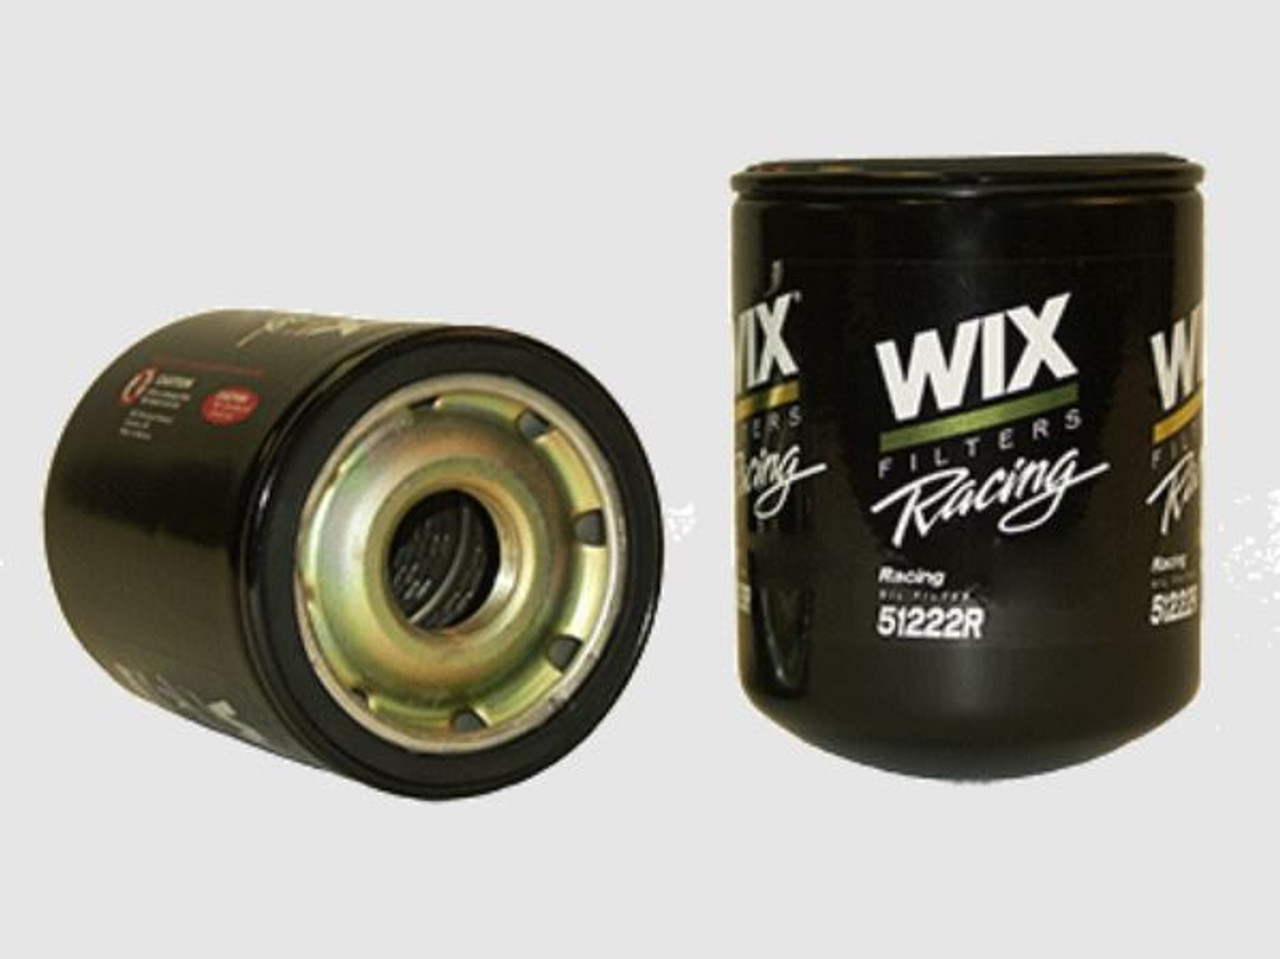 WIX Filters Racing Oil Filter - 51222R - 1 1/2 in.-12 Thread, 6.21 in. Height